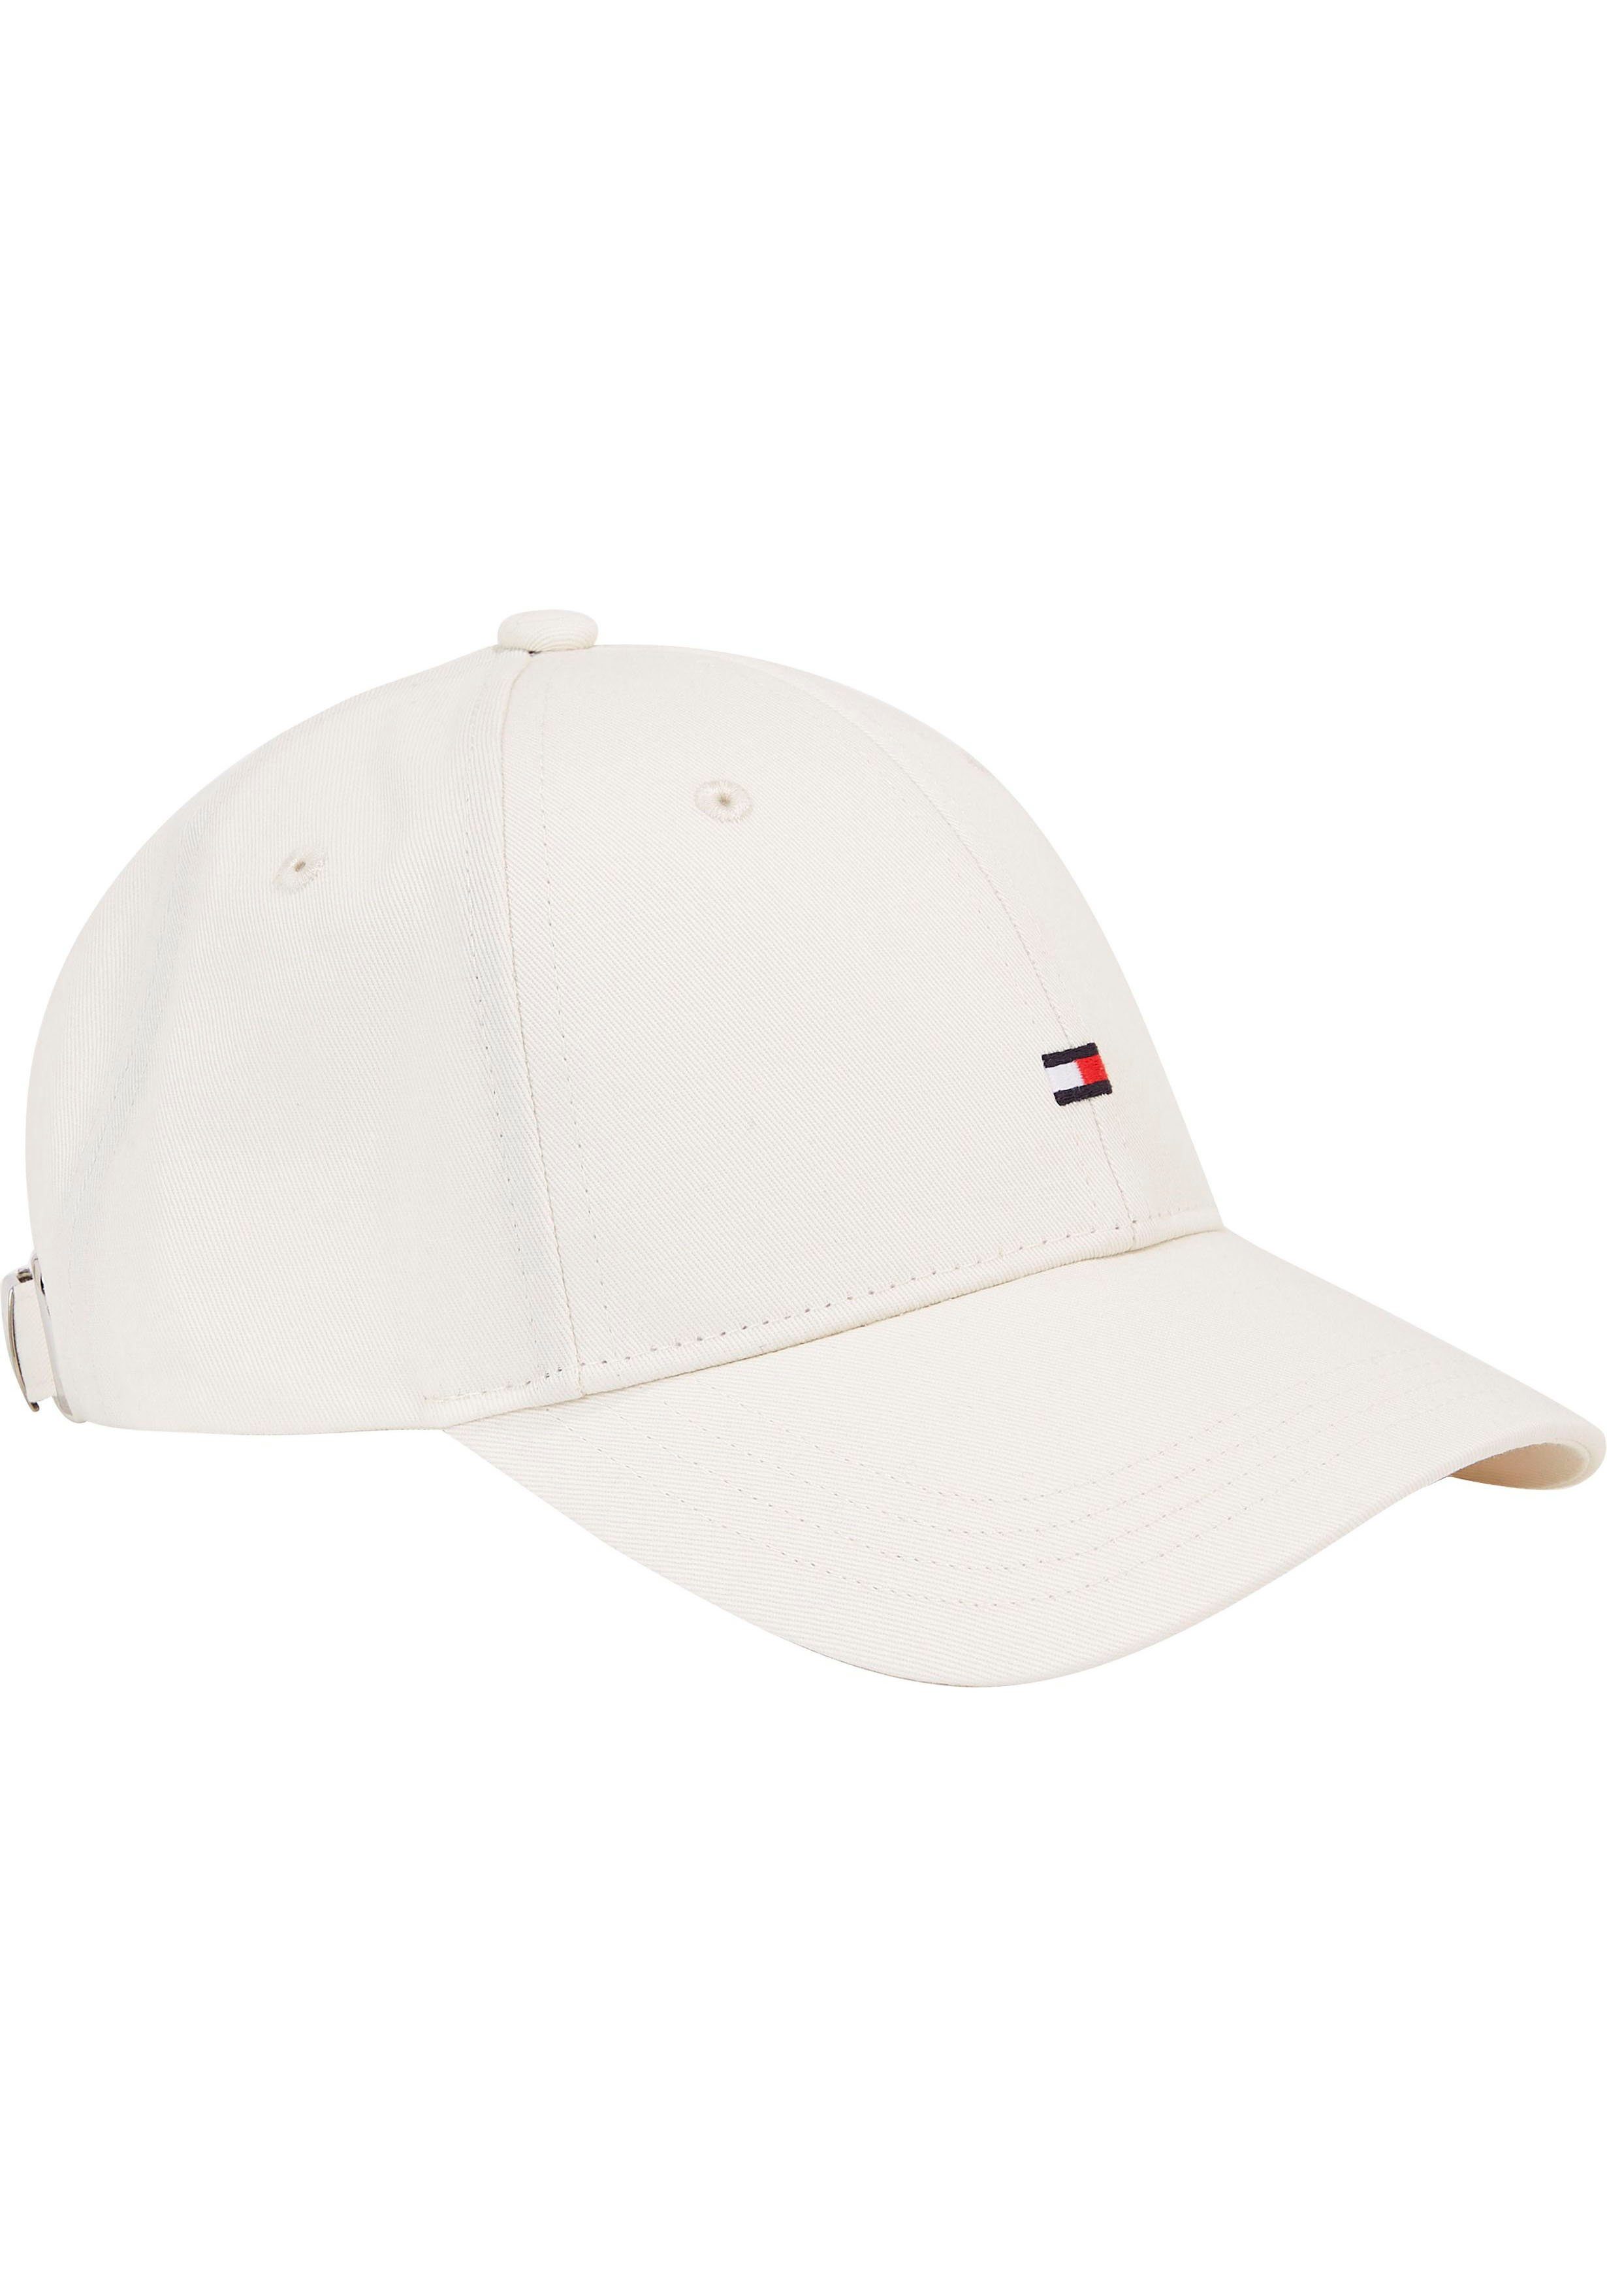 SMALL Klemmverschluss Fitted mit Calico FLAG CAP Hilfiger Tommy Cap